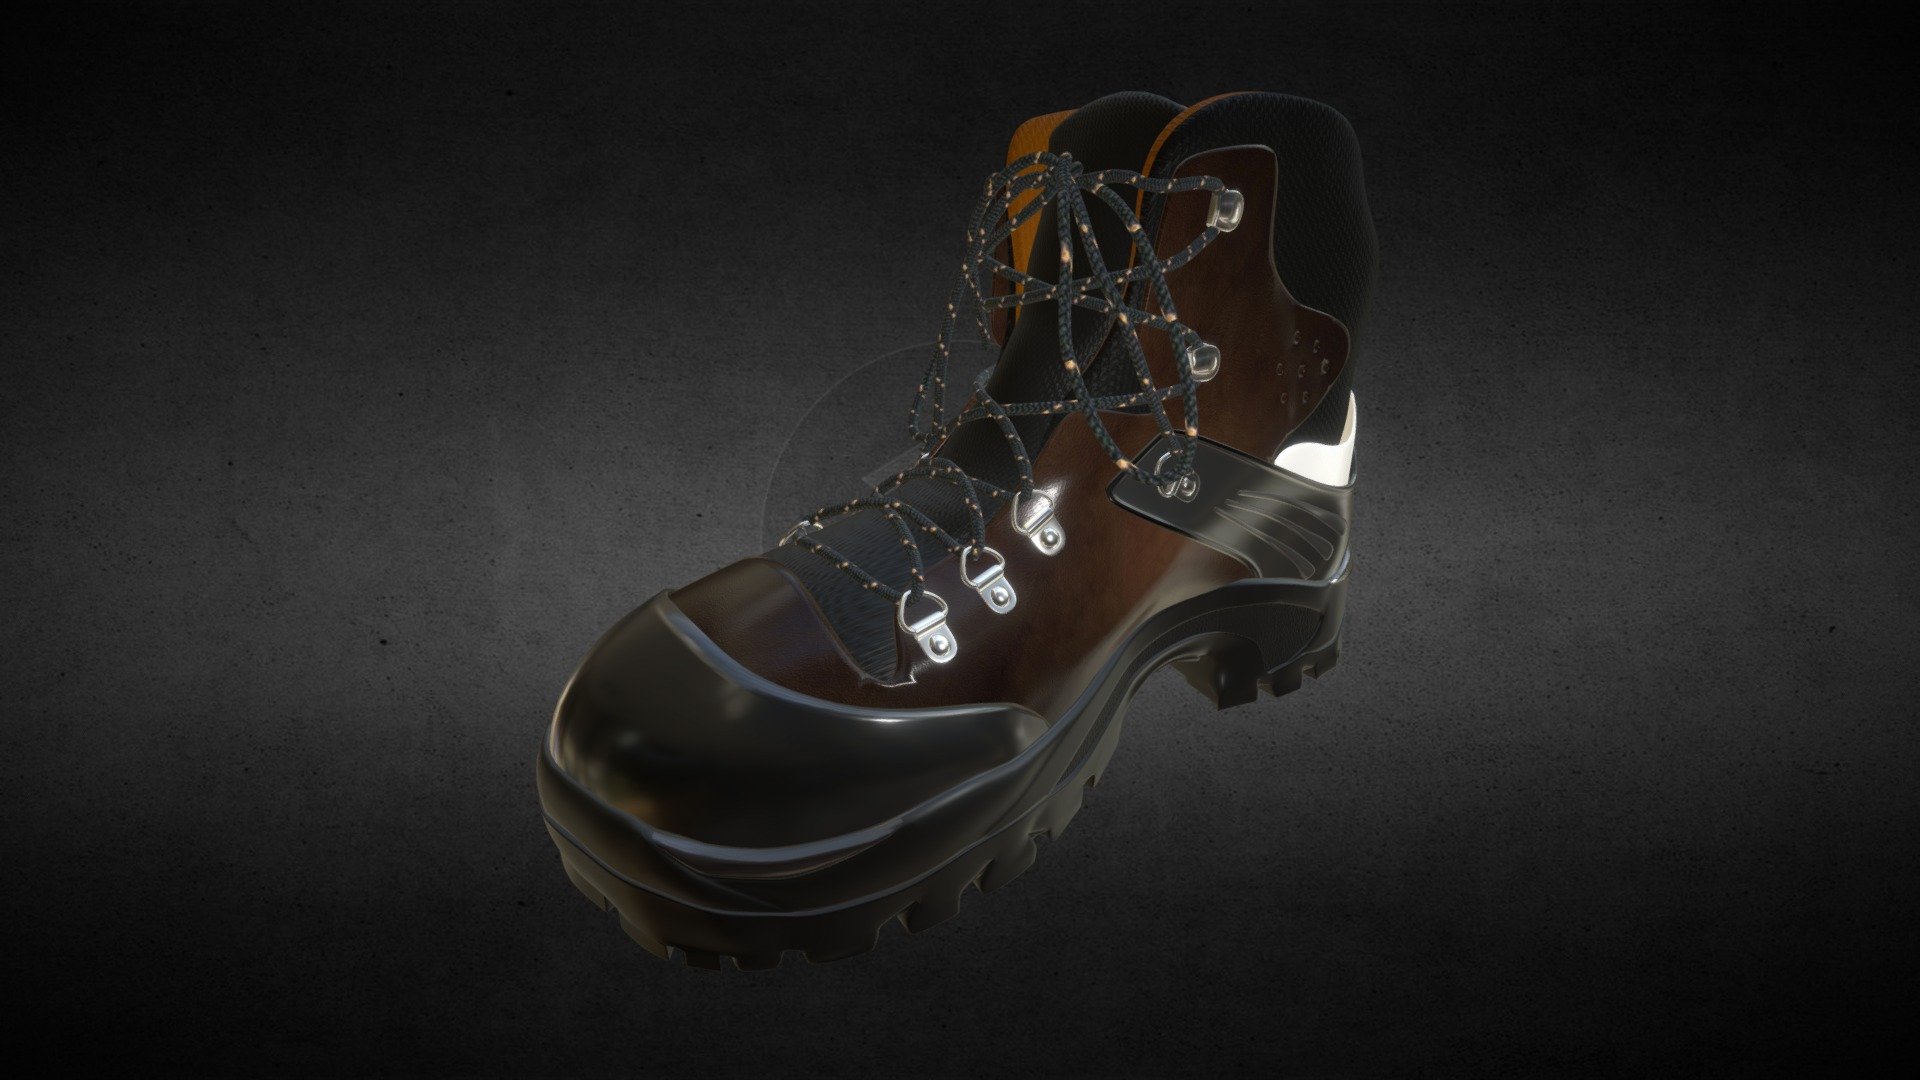 This is a boot I uploaded in 2013 to Sketchfab. It was for a freelance job, in Blender 2.66. It had some problems in the textures and the blender file was failing. So I fixed the problems and now I've re-uploaded it with improved textures and using PBR 3d model